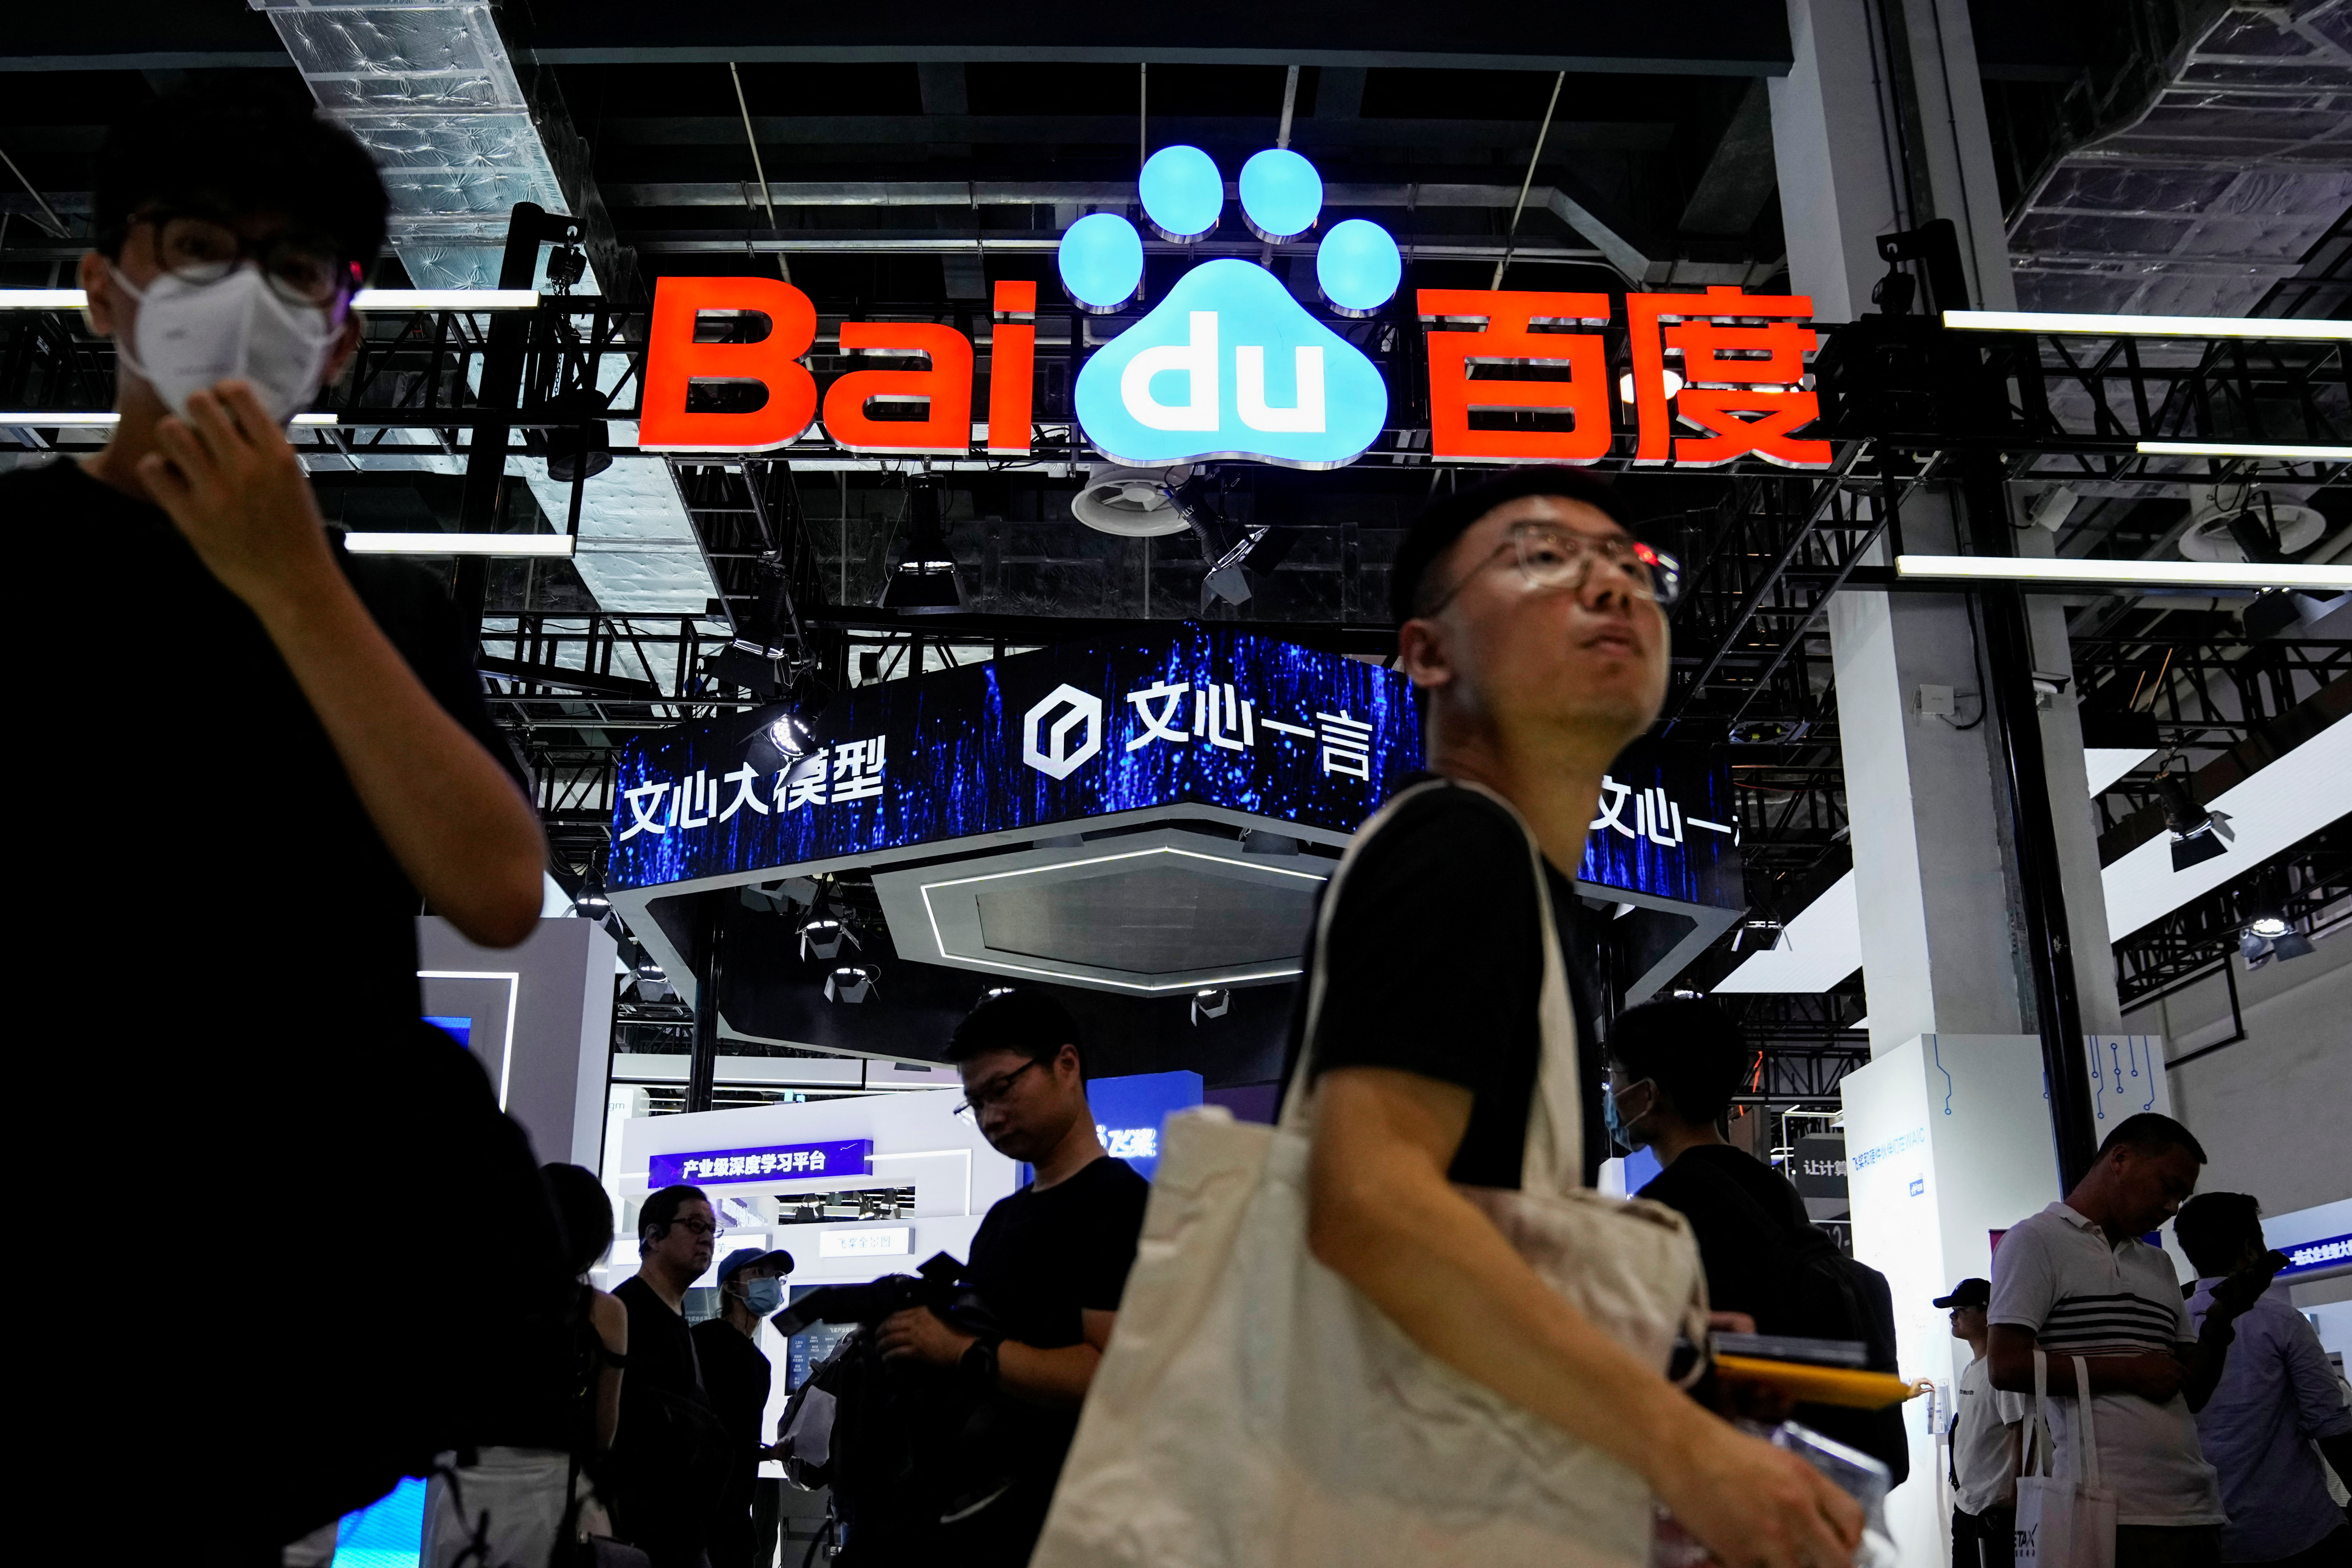 Baidu sign is seen at the World Artificial Intelligence Conference (WAIC) in Shanghai